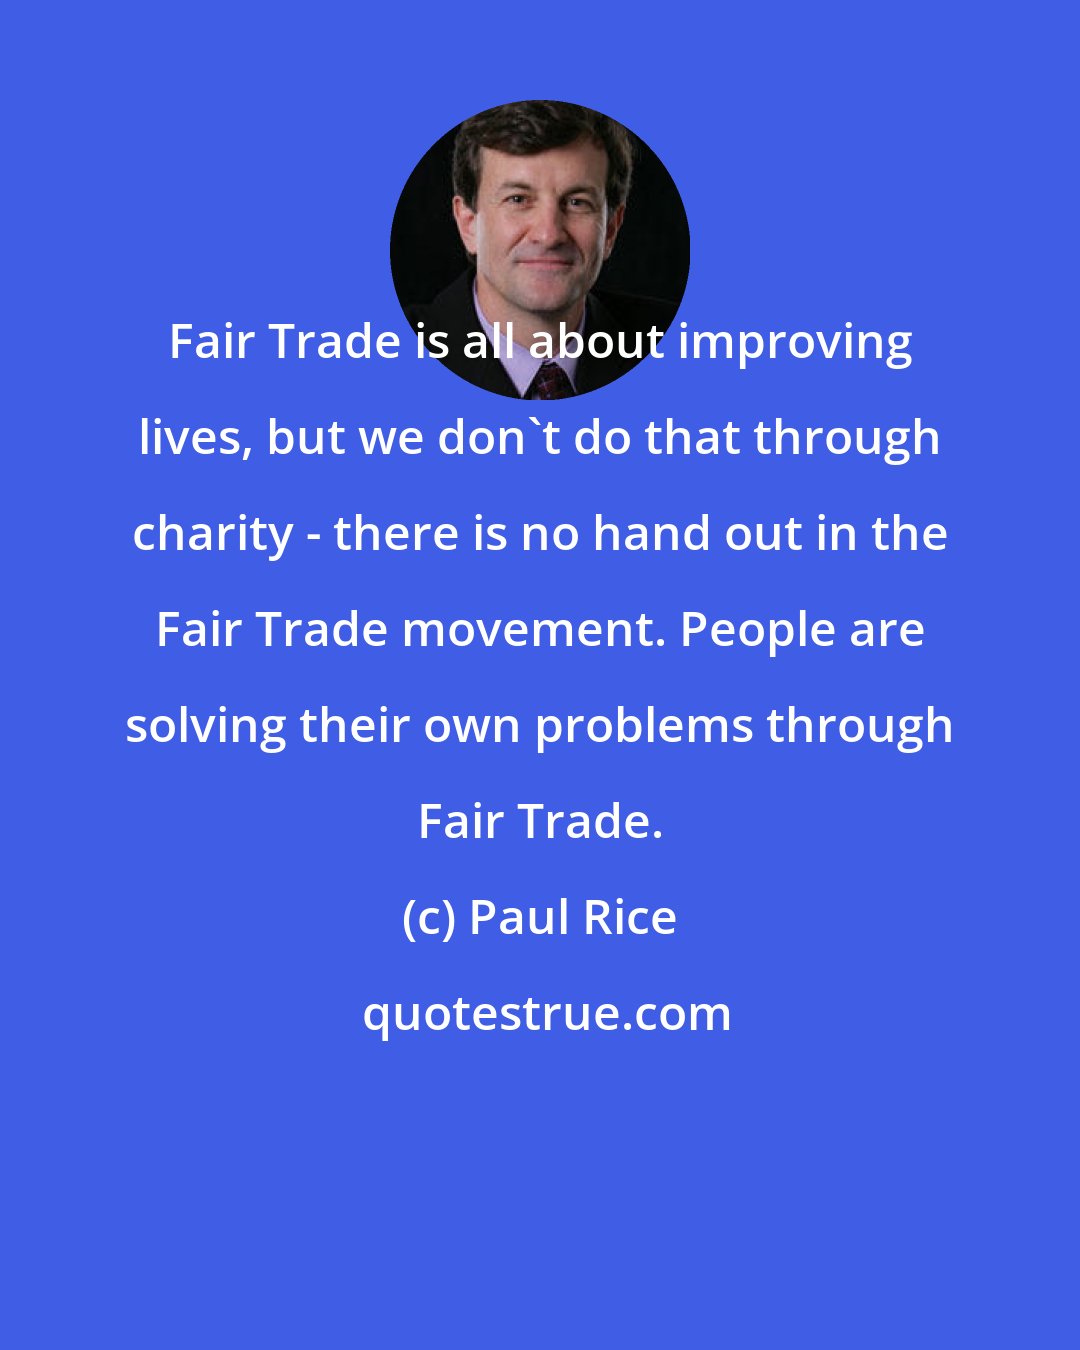 Paul Rice: Fair Trade is all about improving lives, but we don't do that through charity - there is no hand out in the Fair Trade movement. People are solving their own problems through Fair Trade.